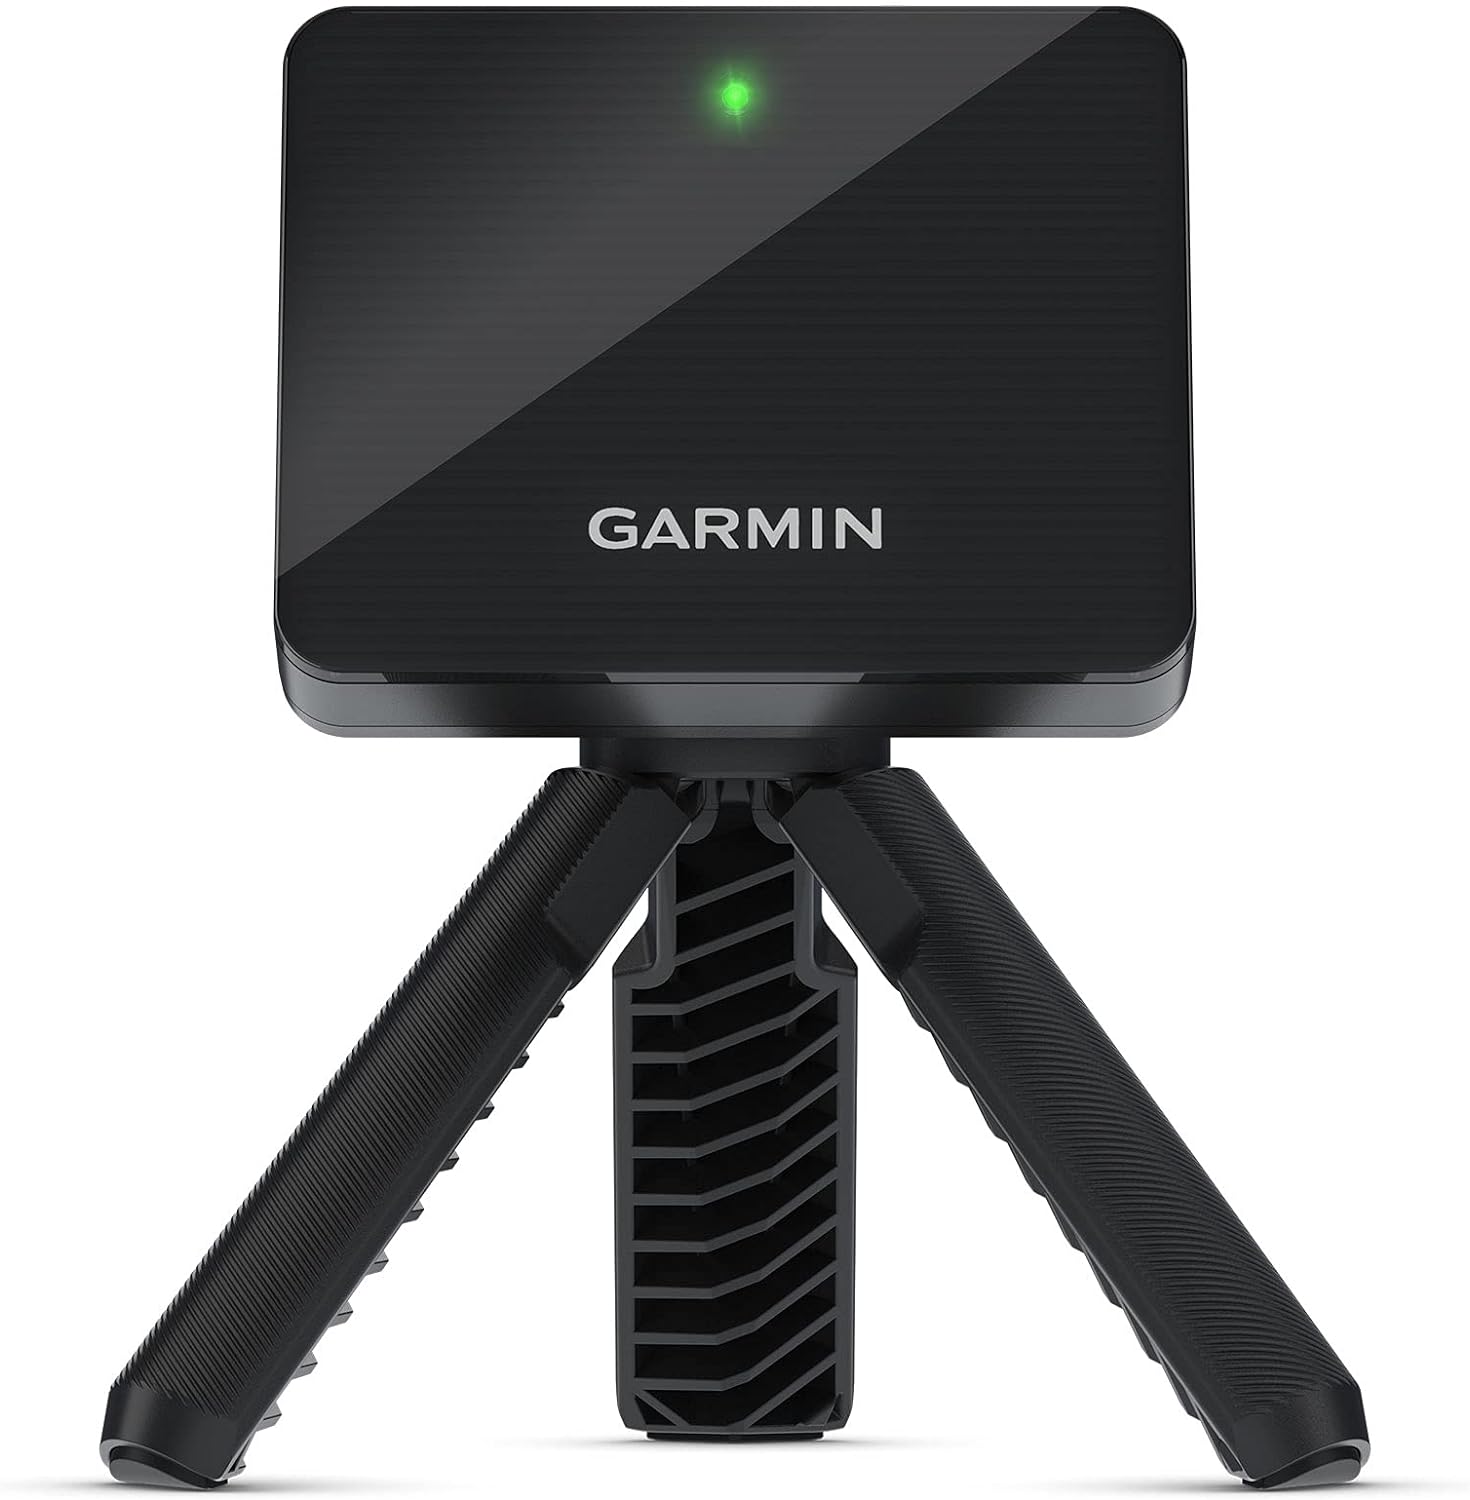 Garmin Approach R10 Portable Golf Launch Monitor with 6Ave Travel & Cleaning Kit